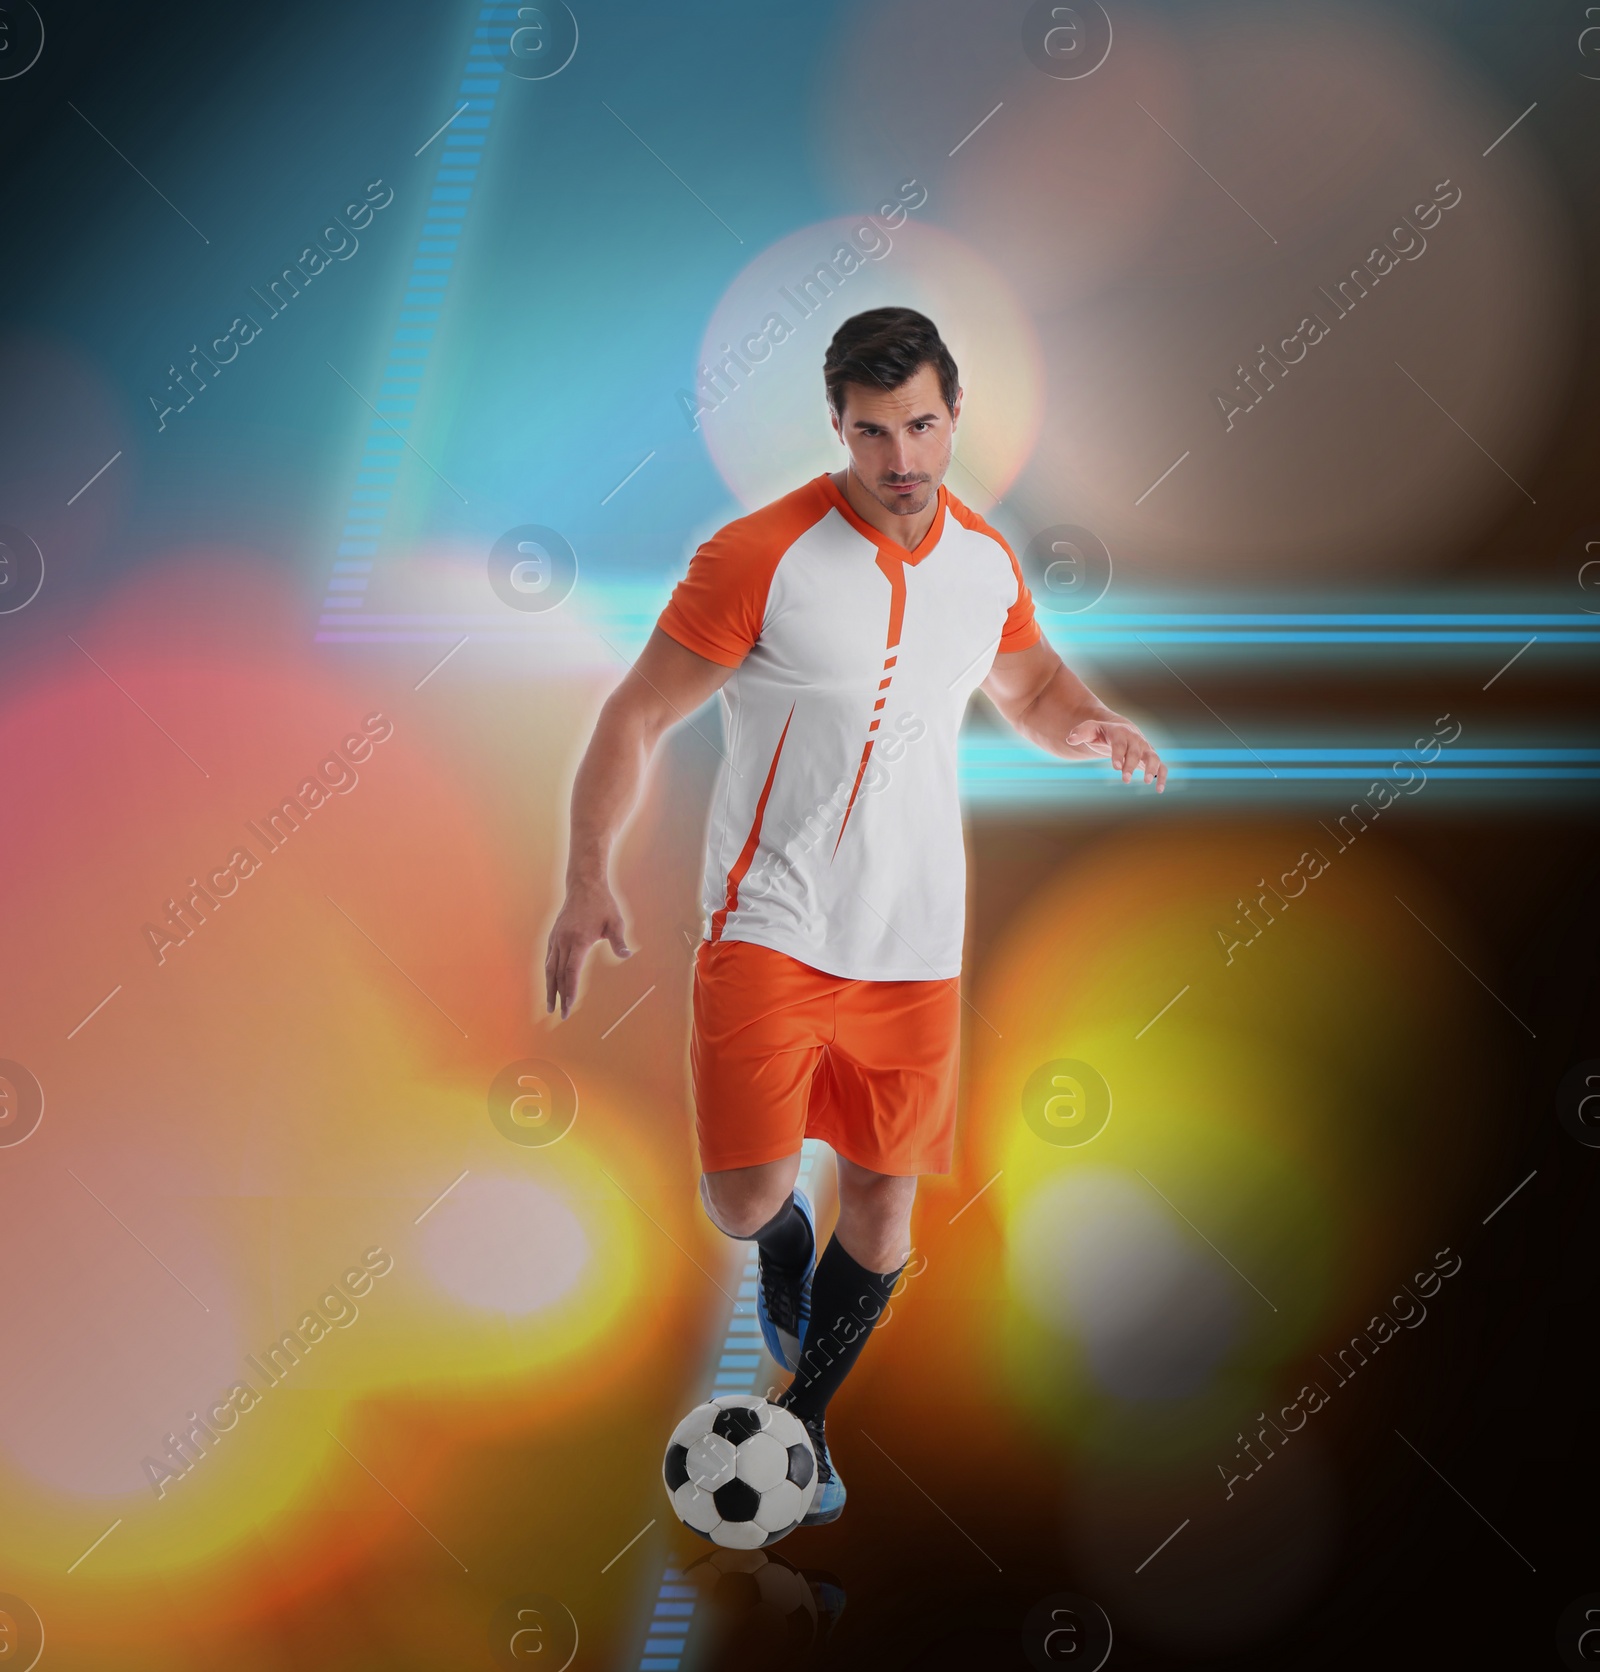 Image of Shot of football player in action. Creative design